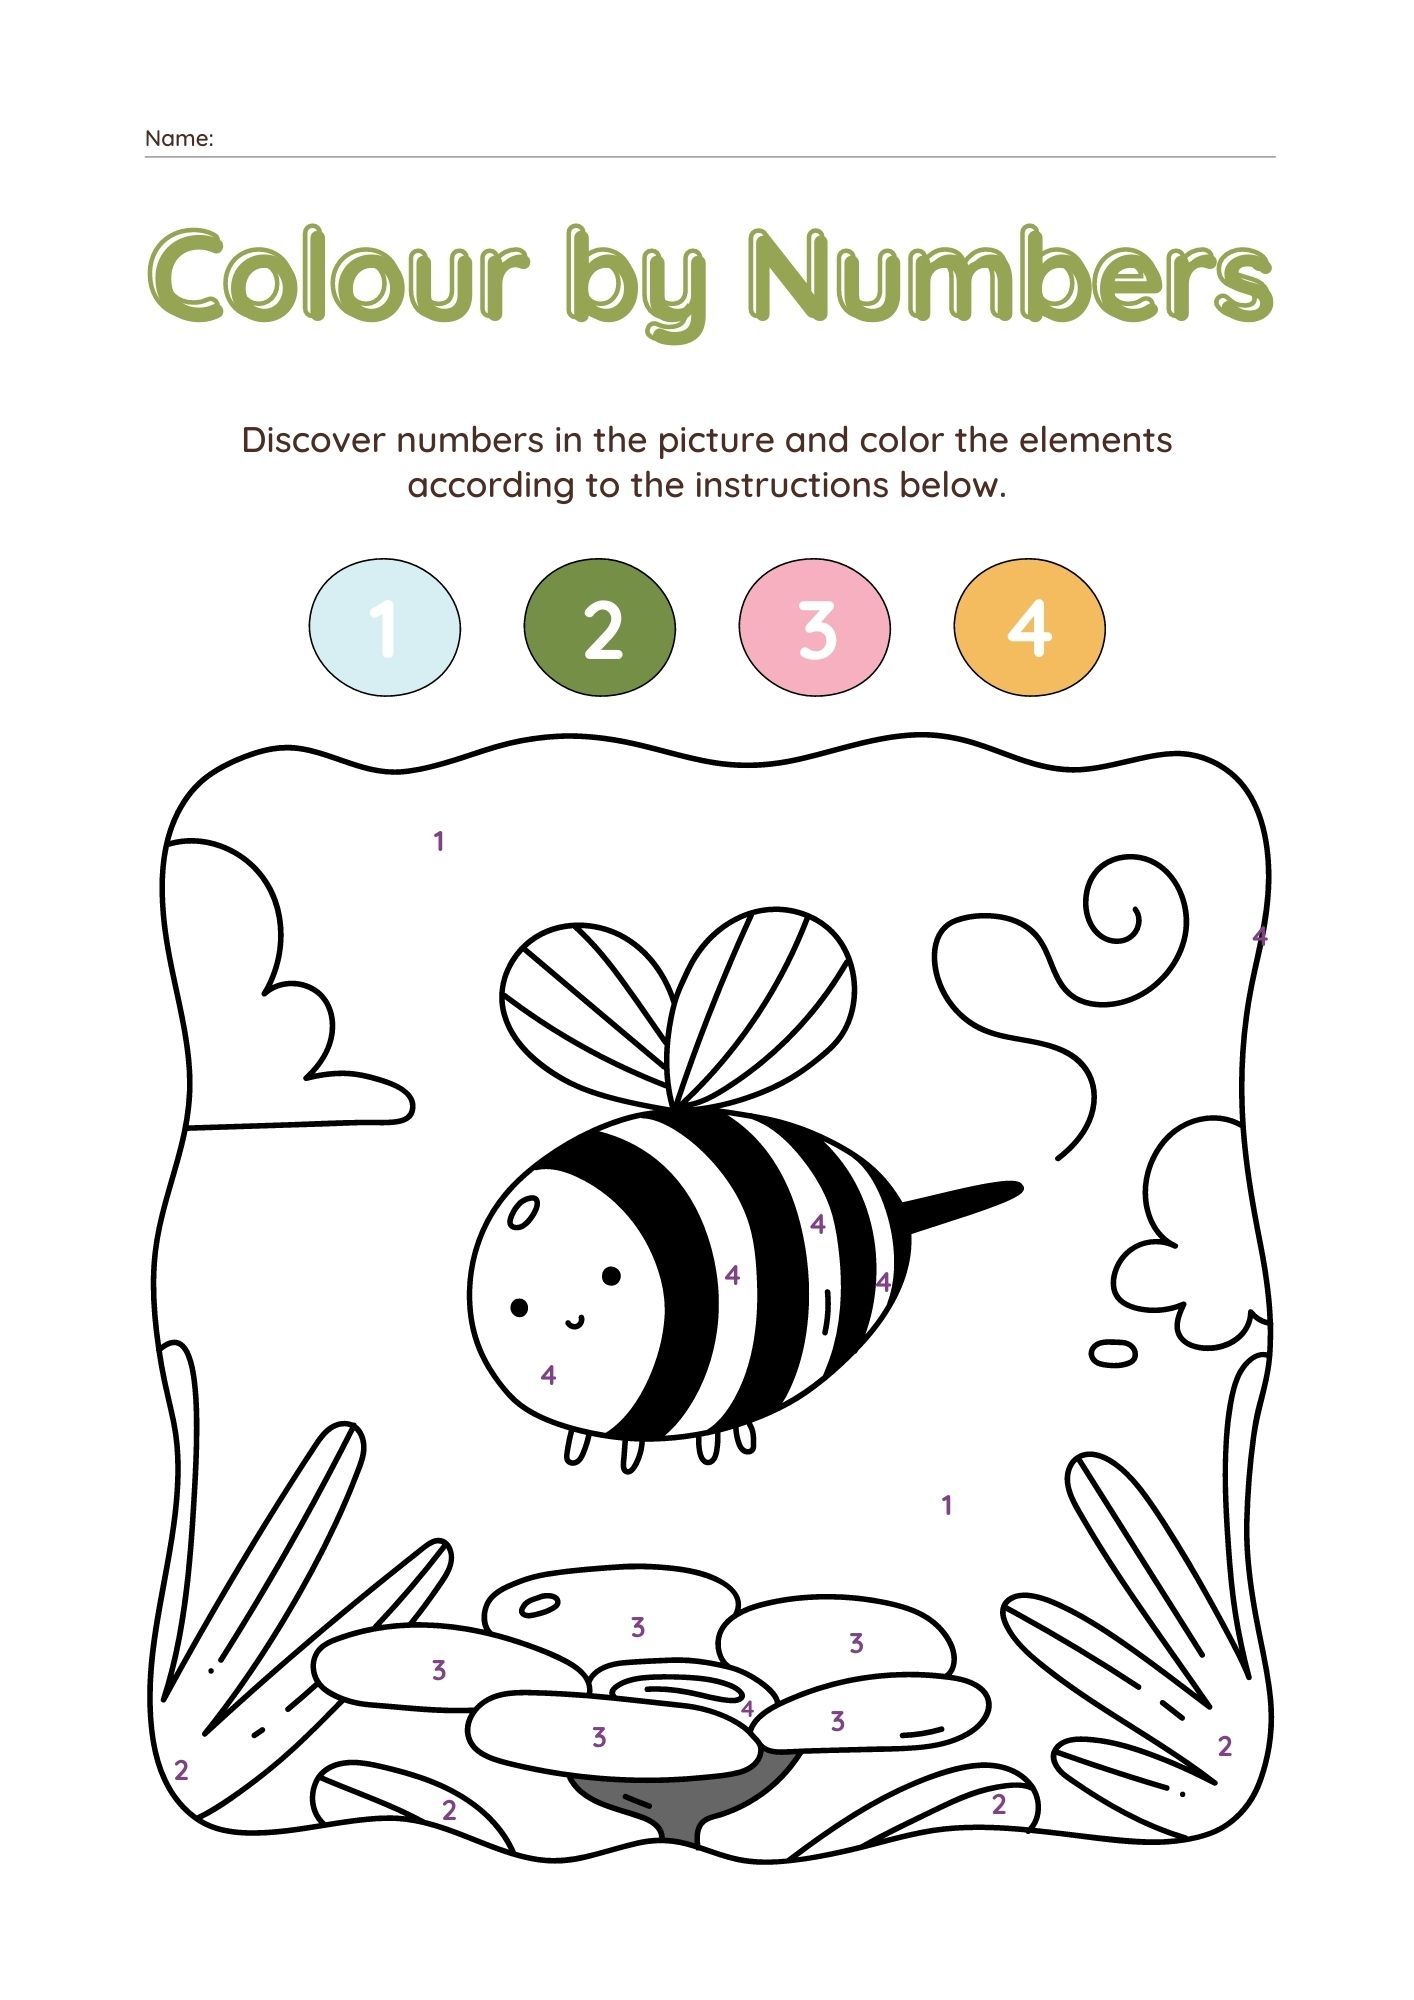 Colour by numbers free printable download